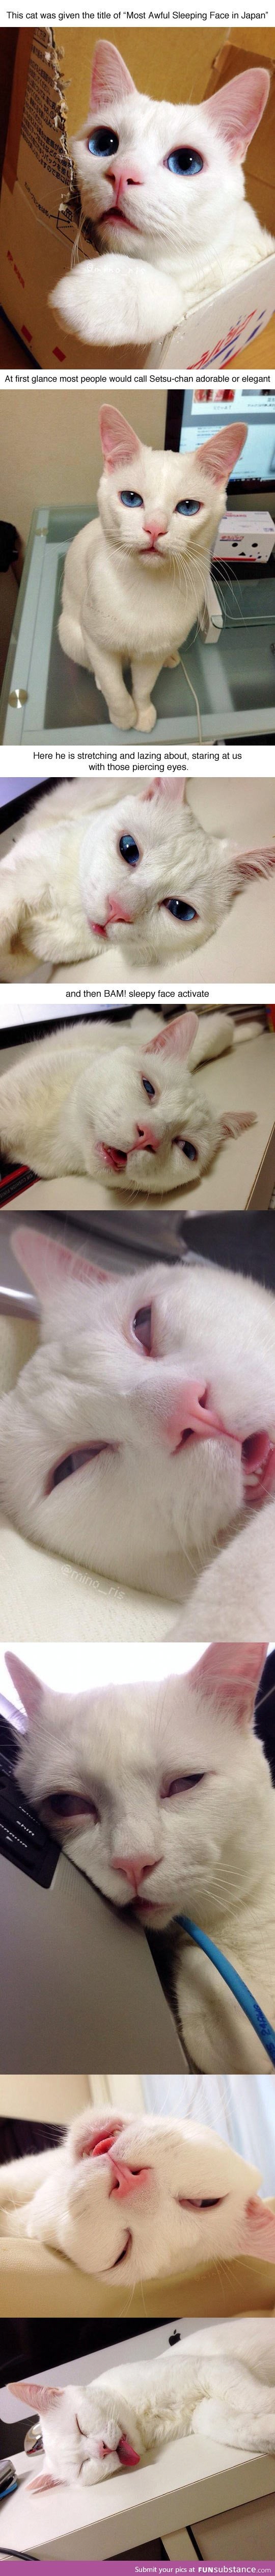 This cat has the funniest sleeping face ever